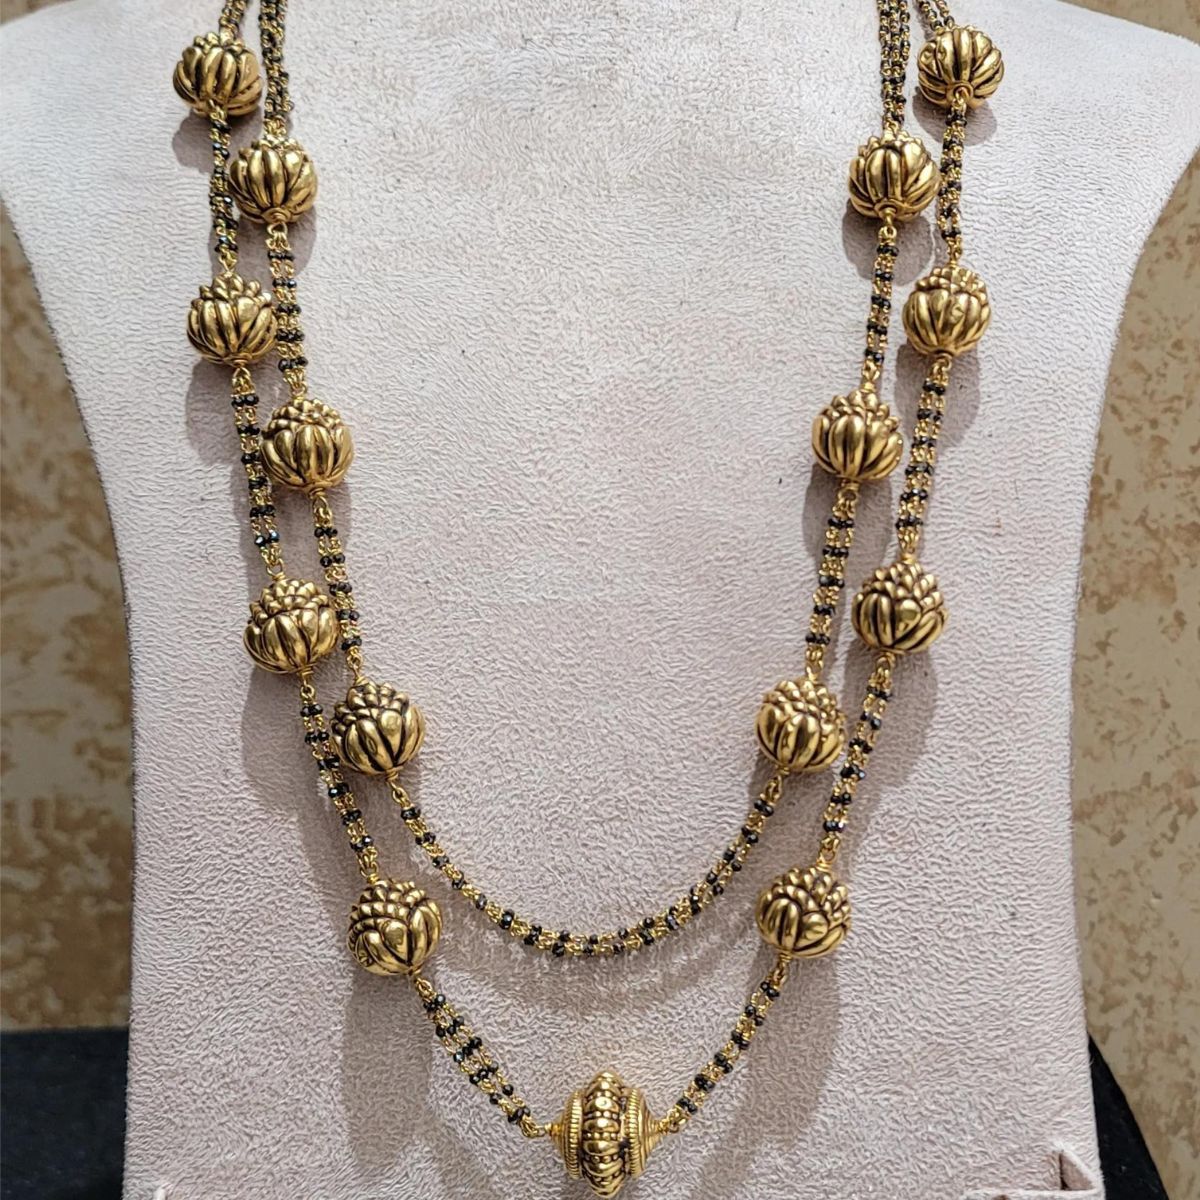 Temple Gold Necklace with Diamond Beads.